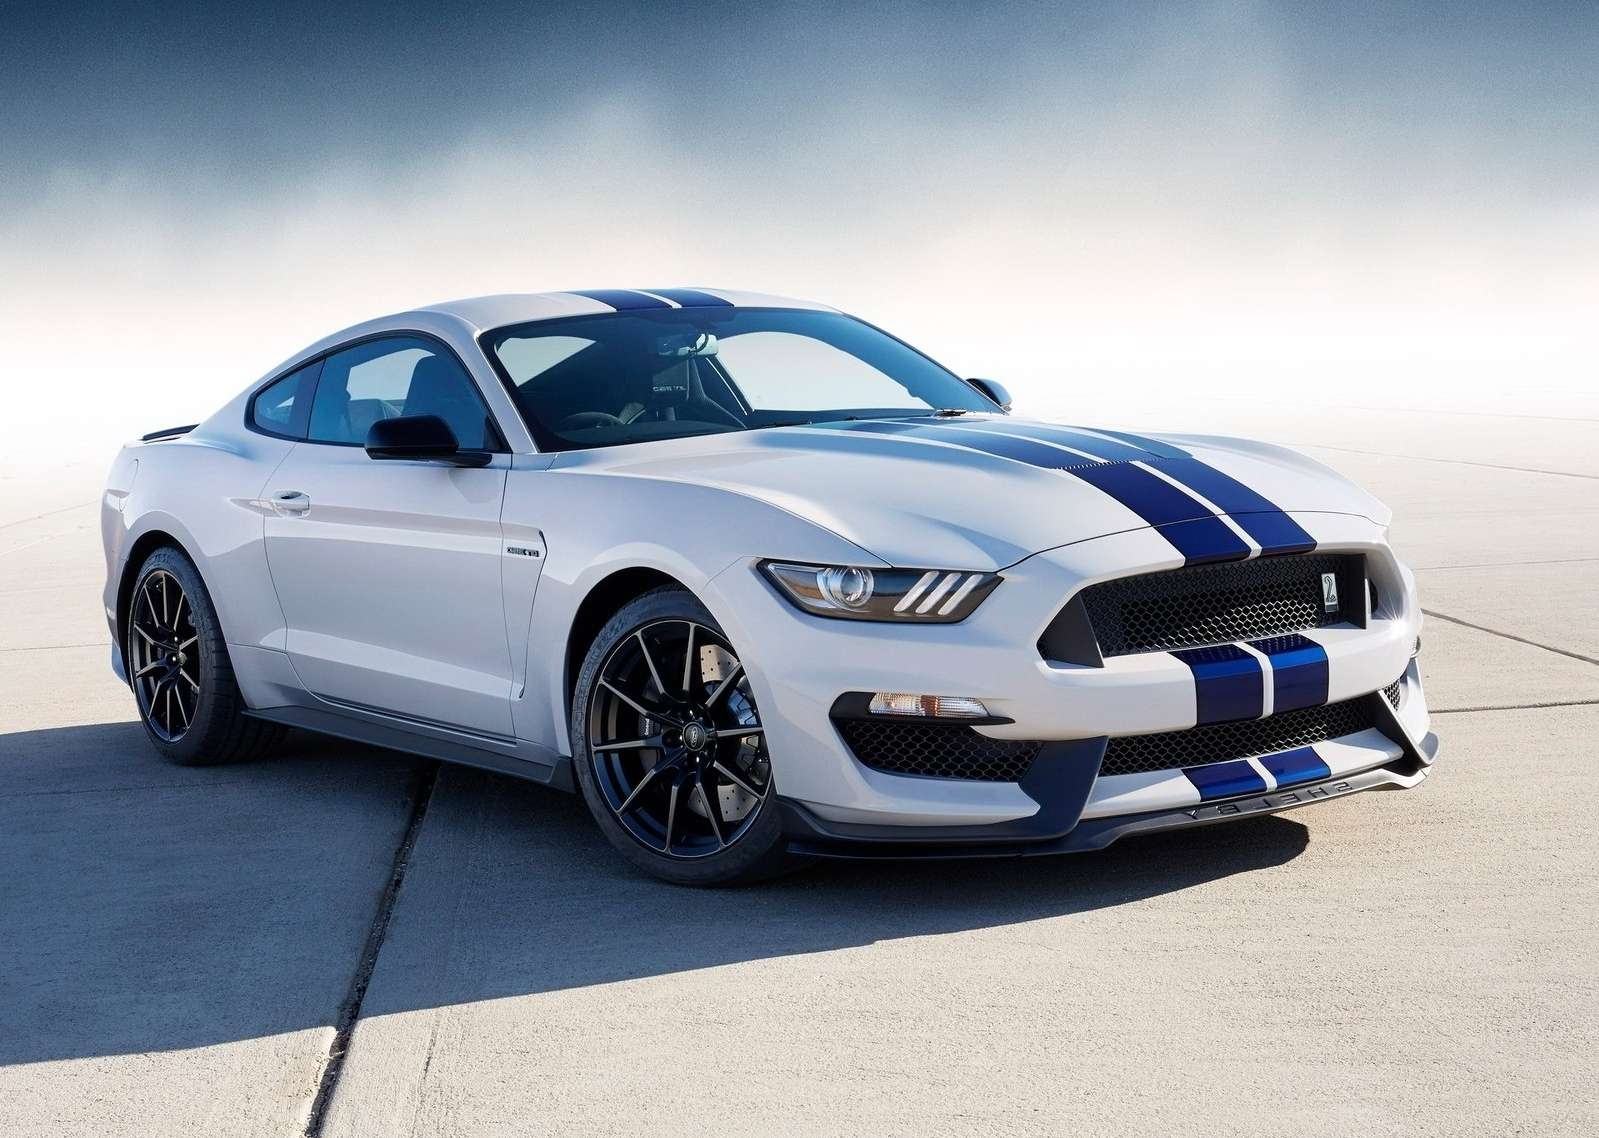 Ford Mustang Shelby Gt350 Wallpapers